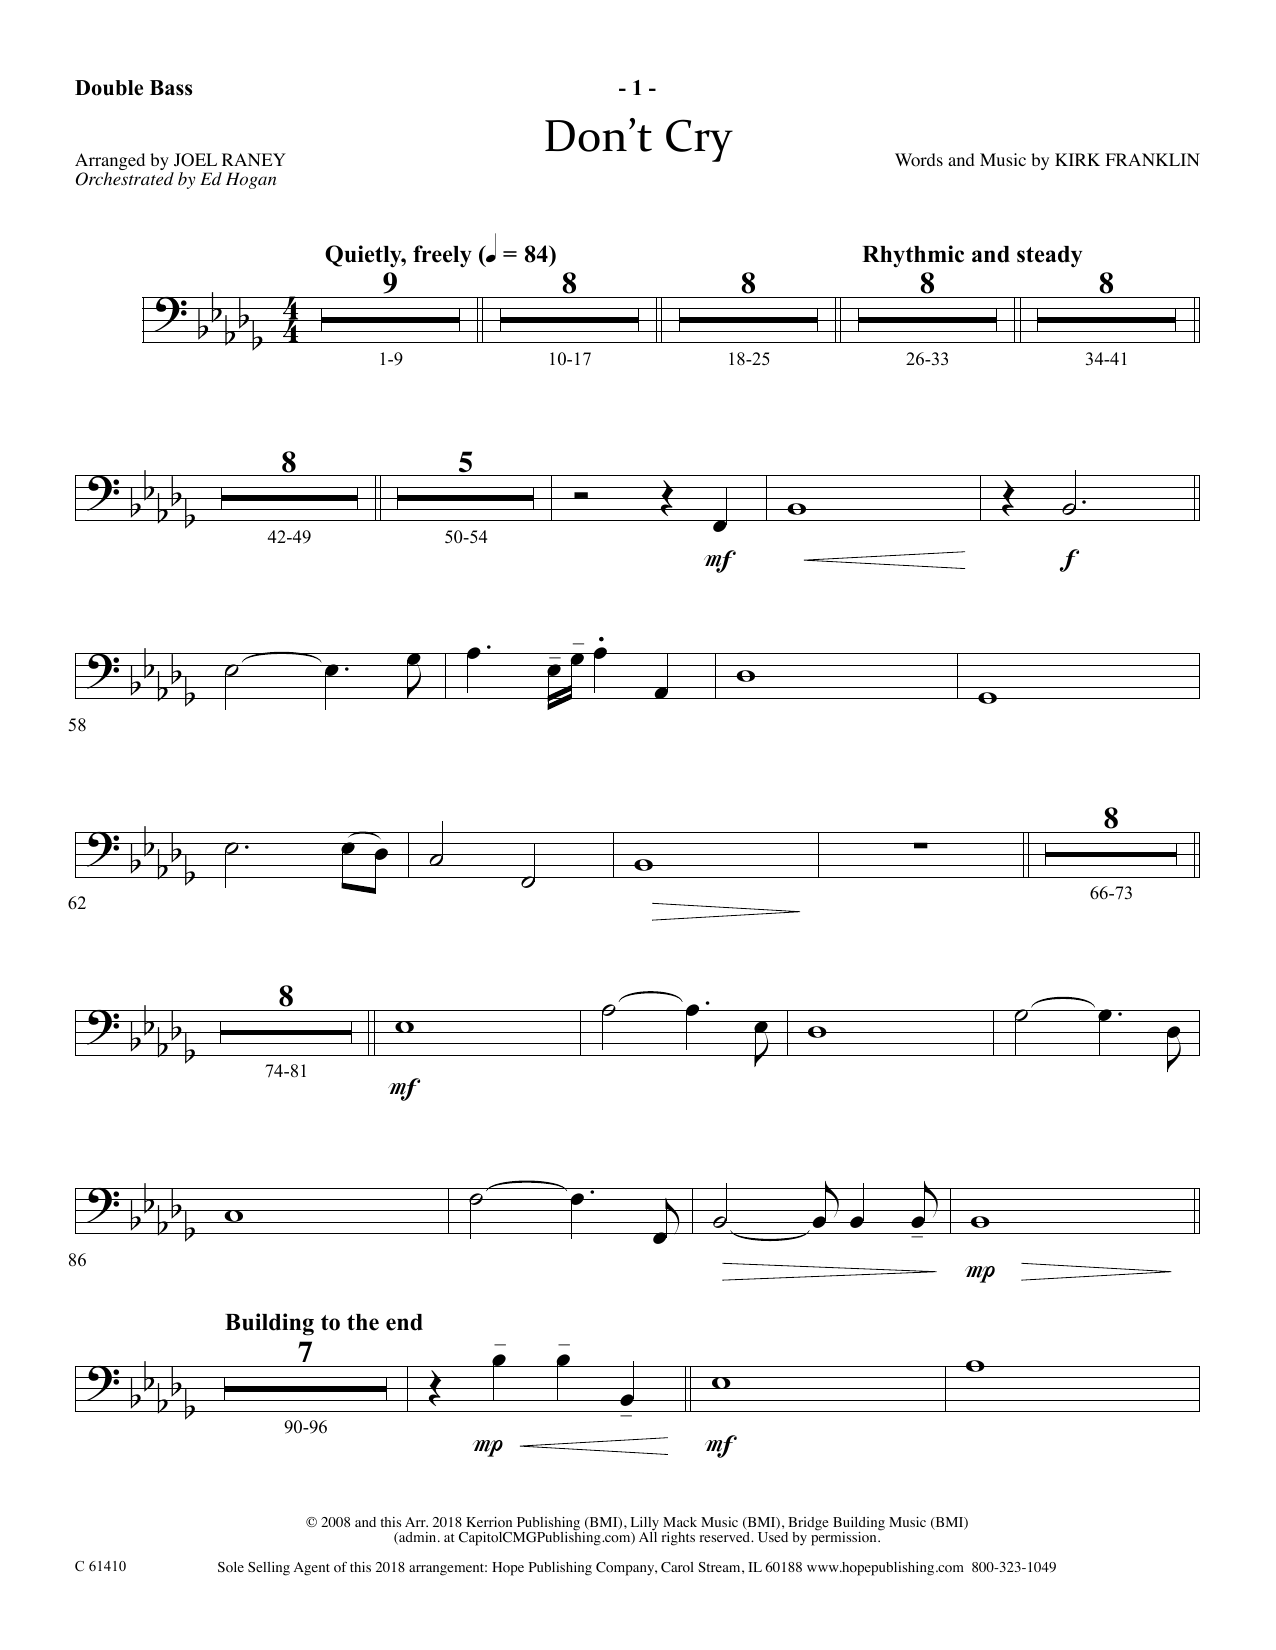 Download Joel Raney Don't Cry - String Bass Sheet Music